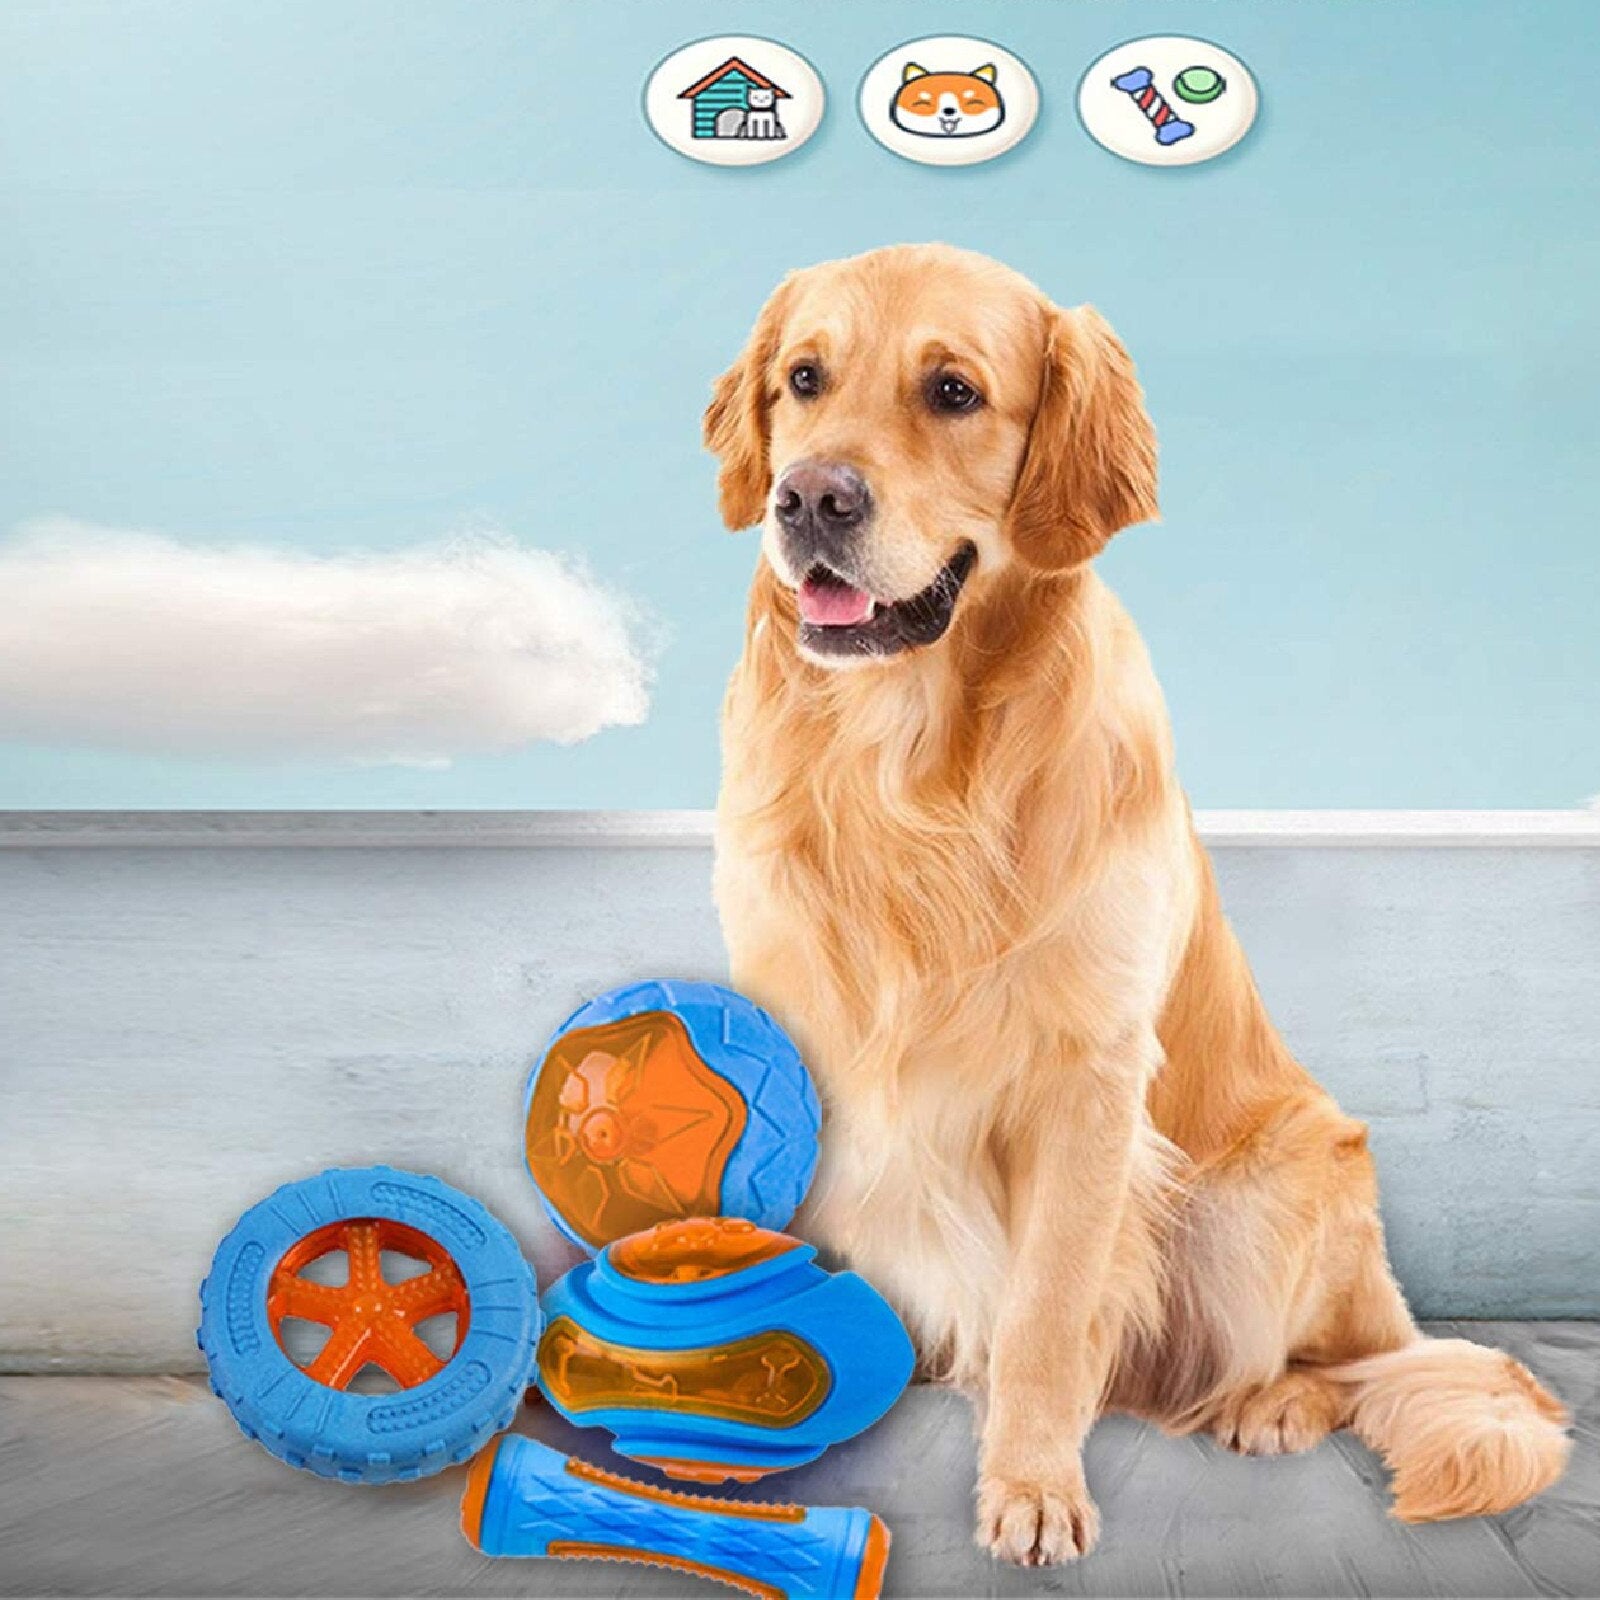 Rubber Dog Toys for Dog Chewing Bite Resistant Squeaky Training Playing Toy Interactive Dog Toys for Large Dogs Teeth Cleaning